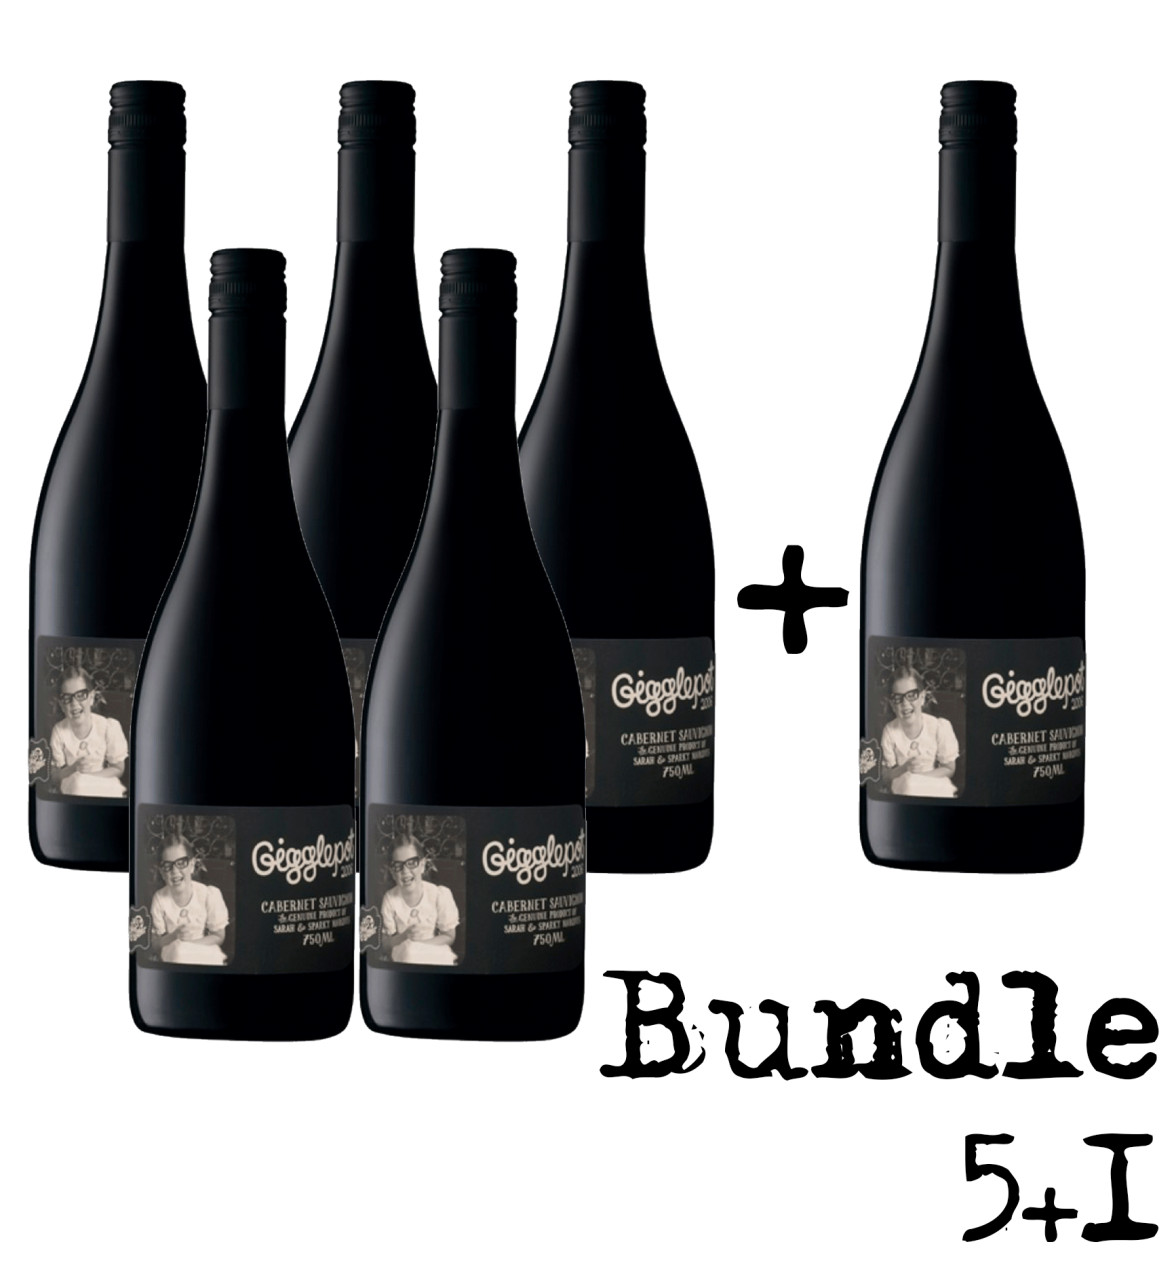 wein.plus find+buy: The wines of our | wein.plus members find+buy